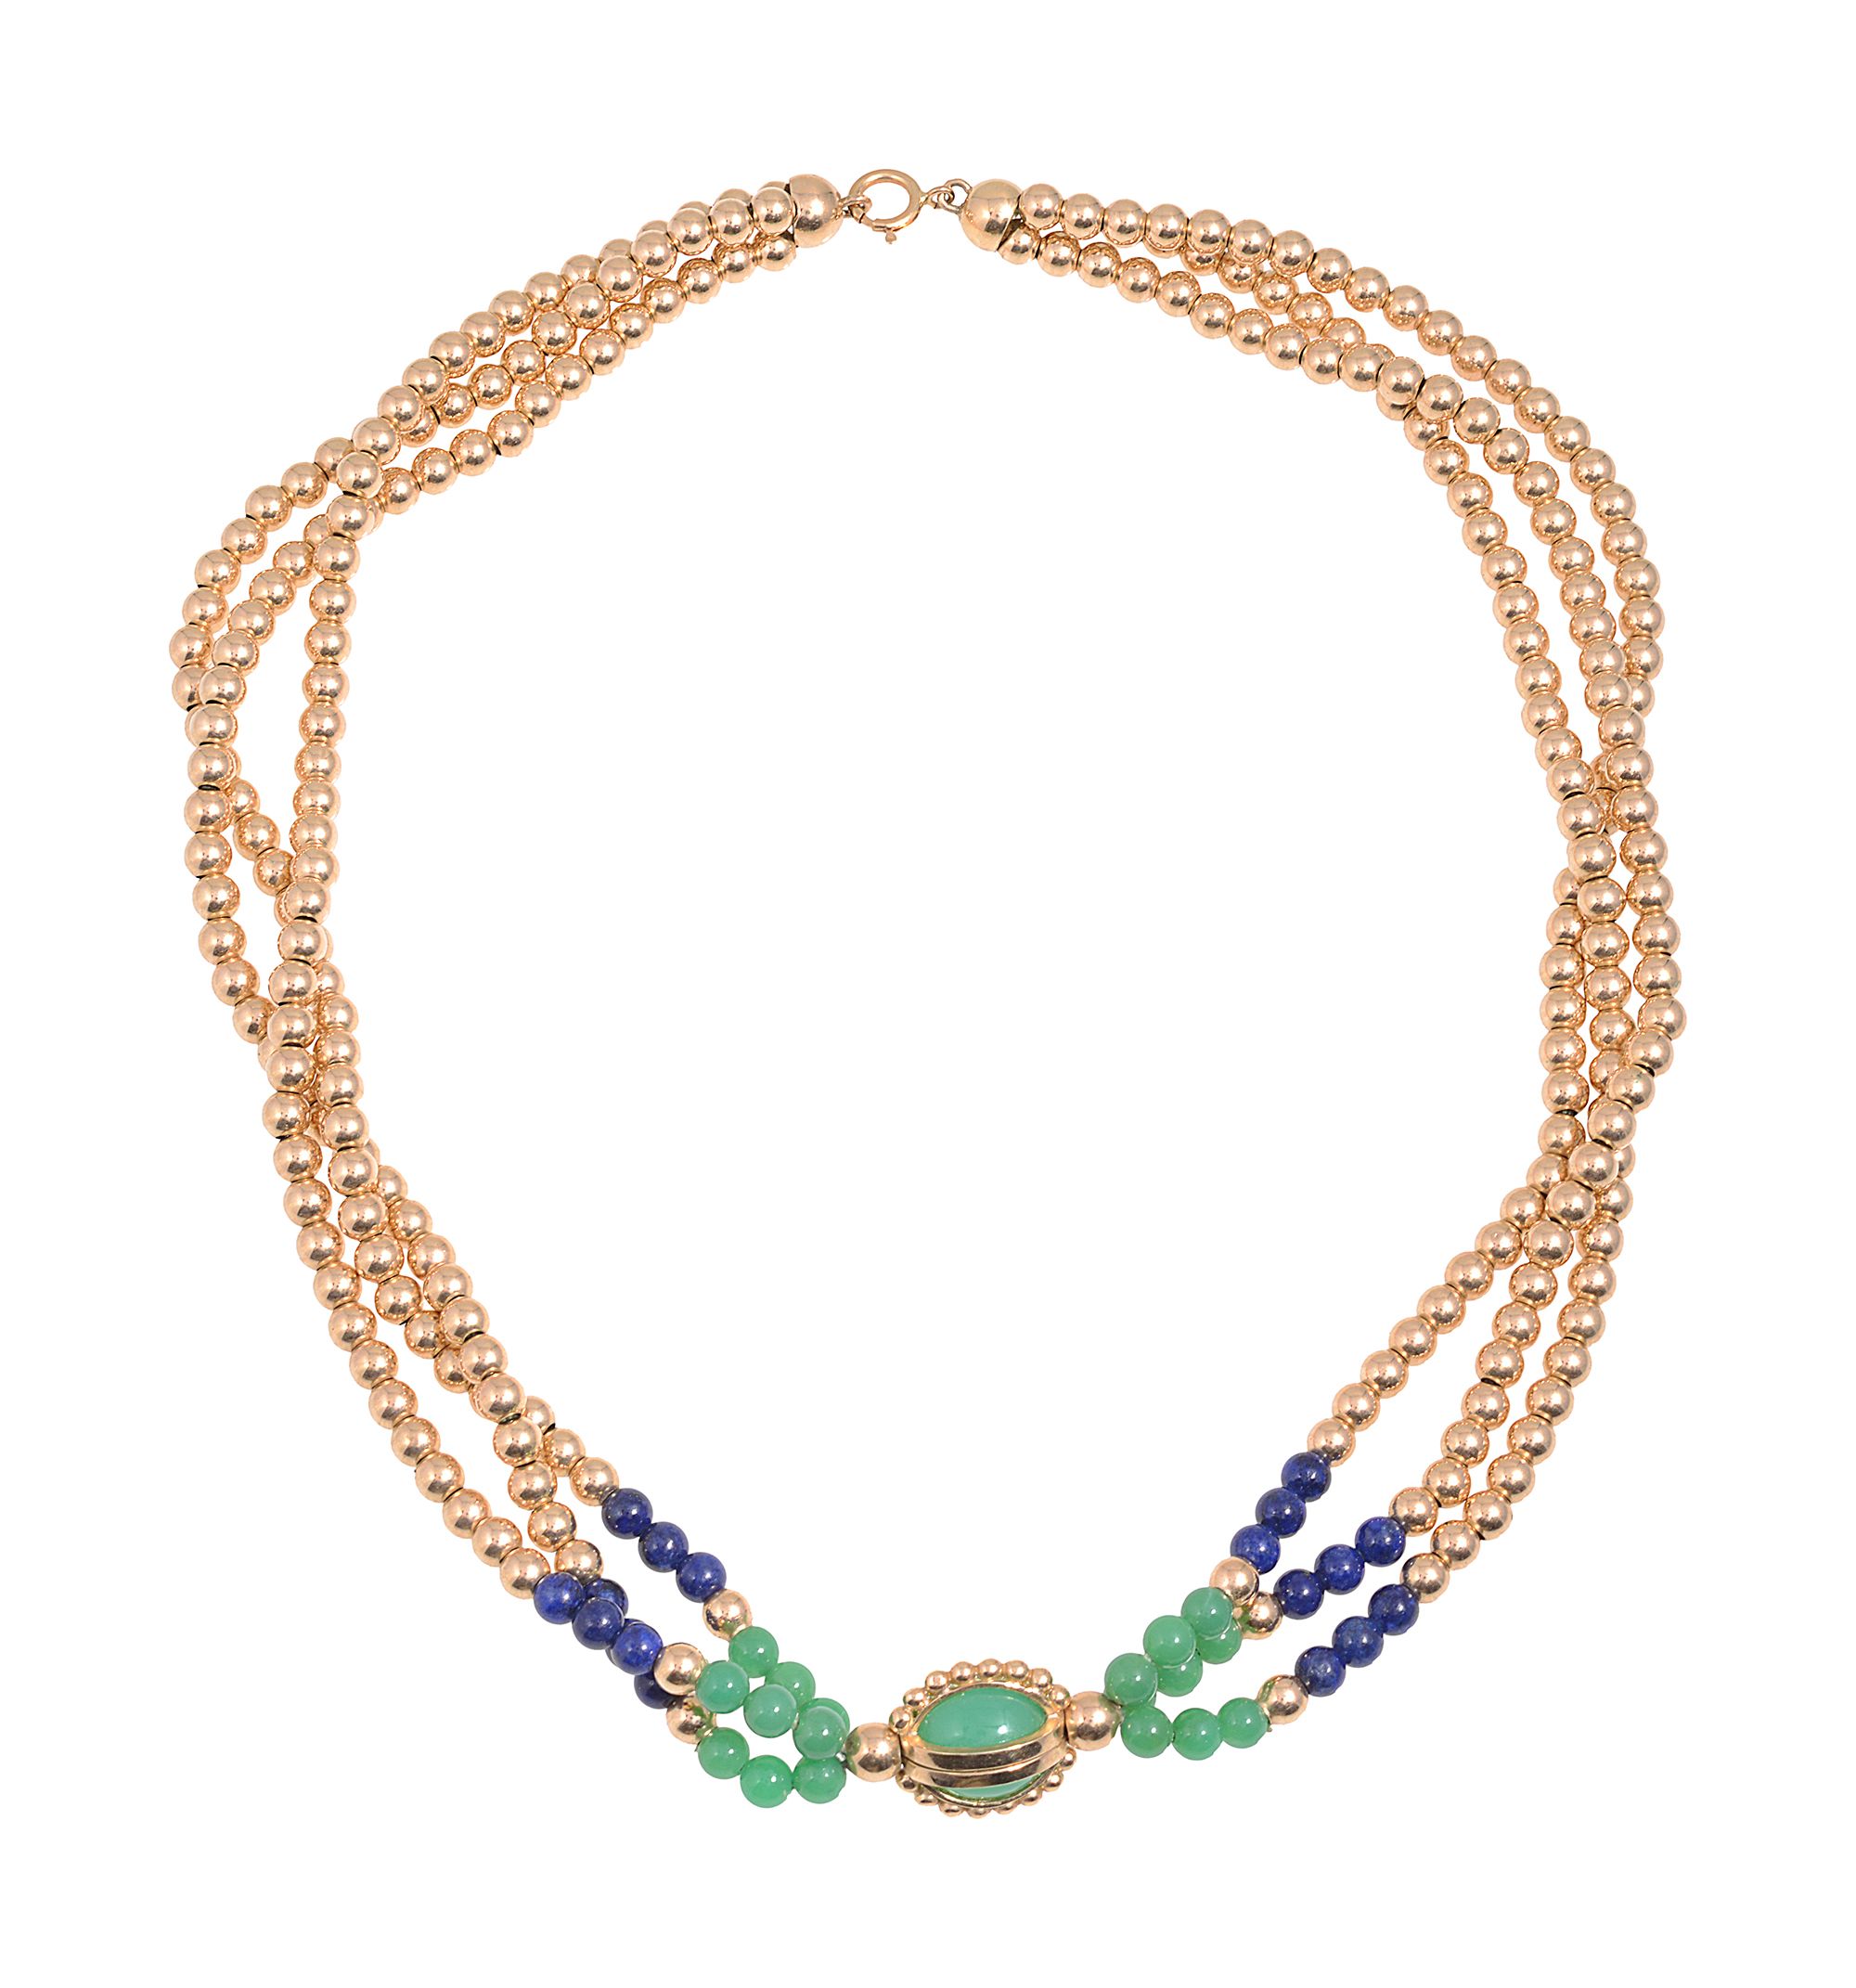 A lapis and green hard stone beaded necklace